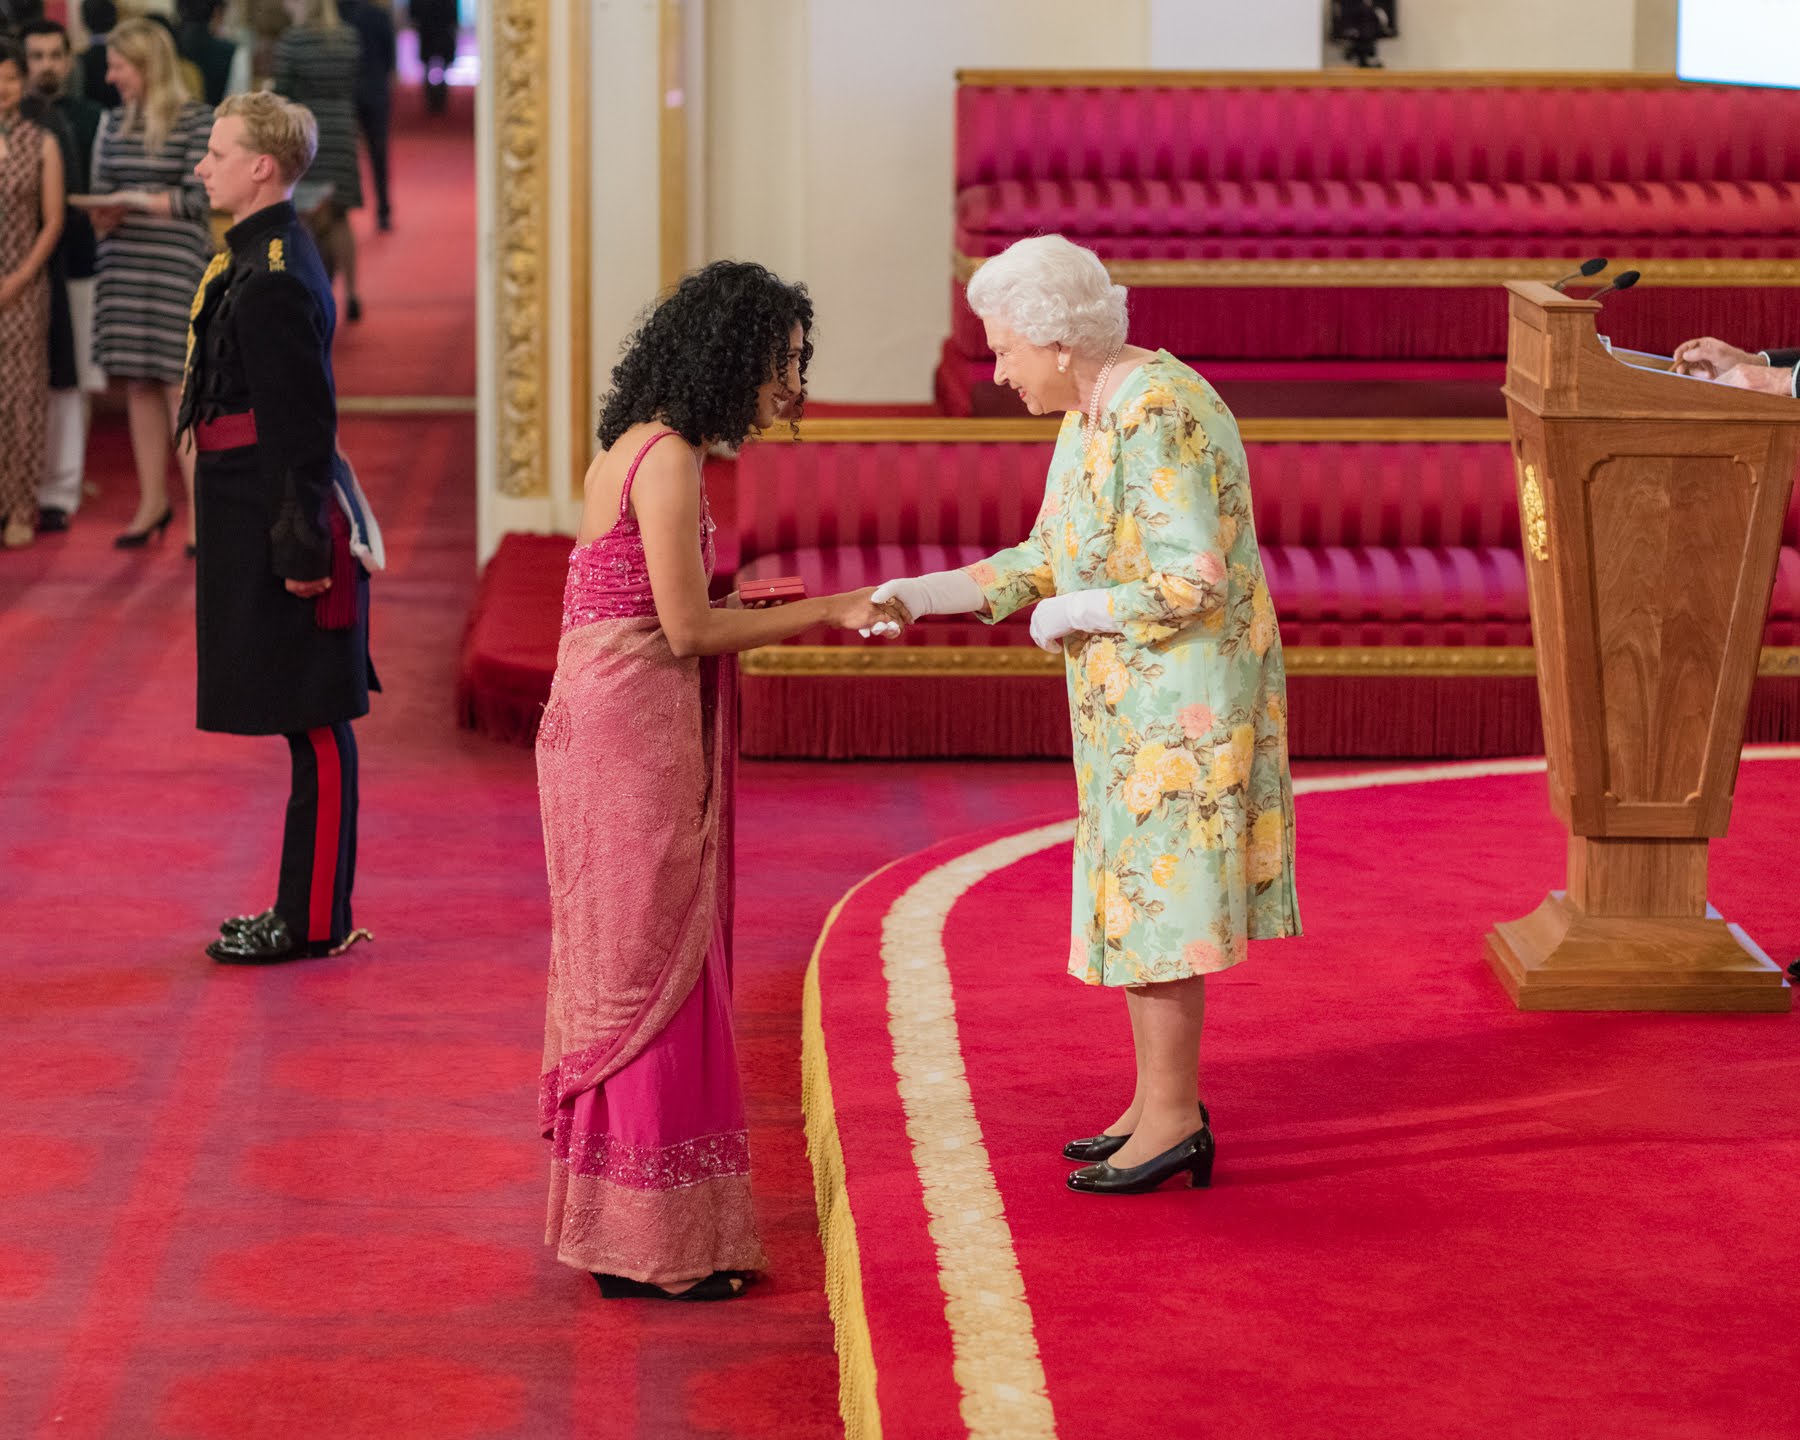 2018 Queens Young Leaders Award Winner Trisha Shetty from India